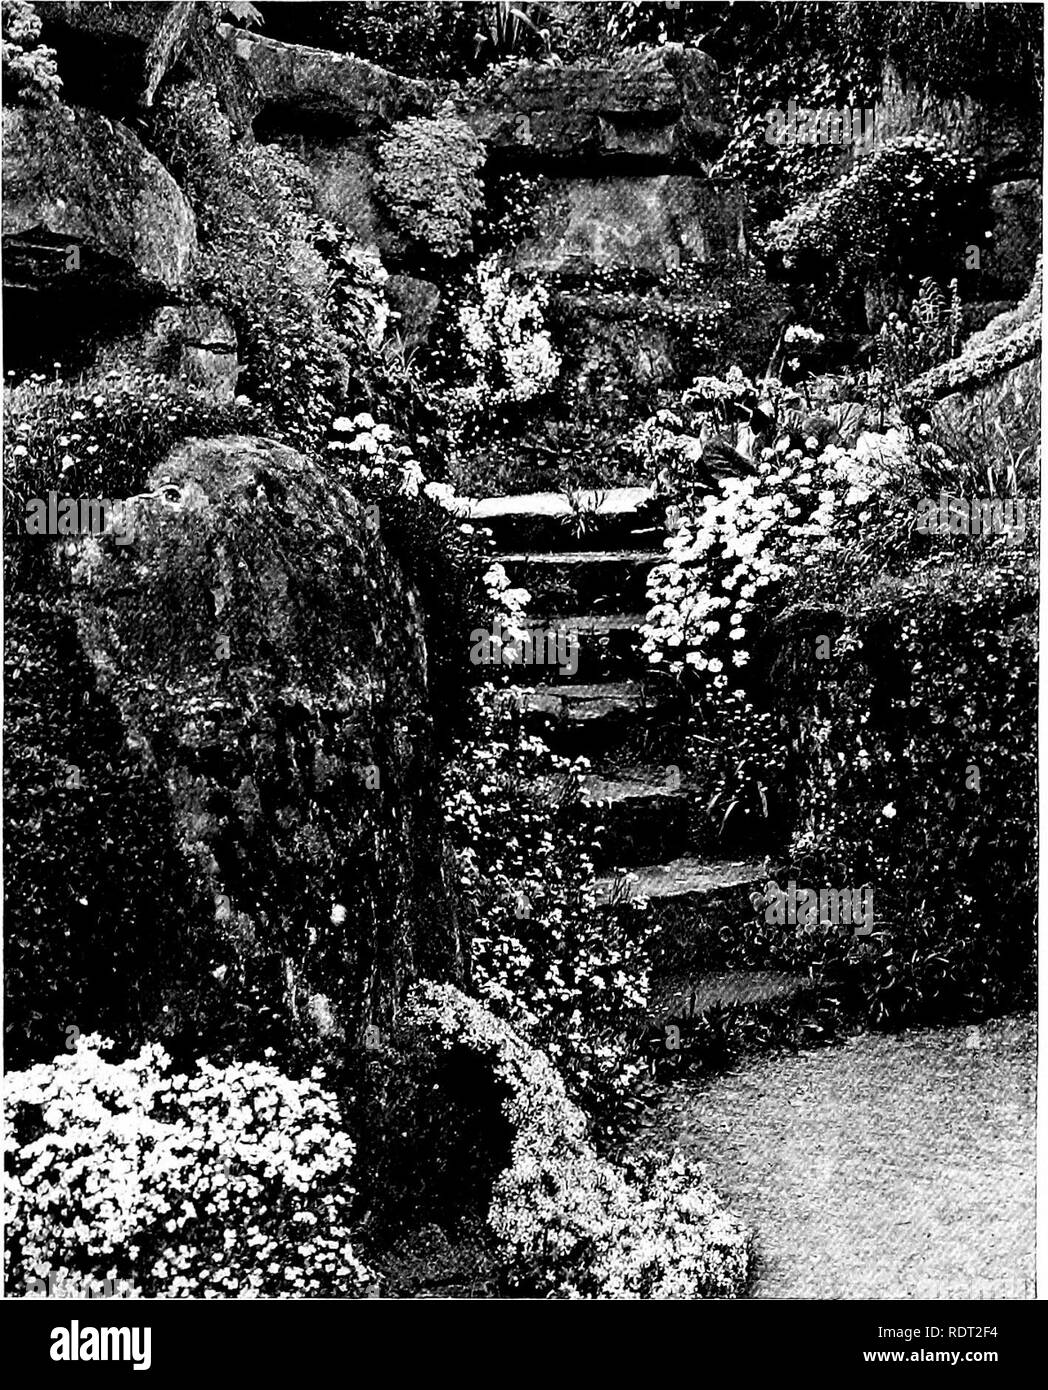 . Gardens for small country houses . Gardens, English. ^54 Gardens for Small Country Houses. of rich compost behind the rock face. Fig. 384 shows the charming effecl of roughly - hewn rocky steps leading down through such a wall from the terrace to the rock garden. Such steps should not be allowed to become over- grown with herbage, though small fry, like E r i n u s alpinus, lonopsi- dium acaule and Linaria alpina, may be suffered to grow in the interstices. In the small bog garden one must carefully avoid such vigorous growers as Gunnera, Rodgersia, Saxifraga peltata and all those plants whi Stock Photo